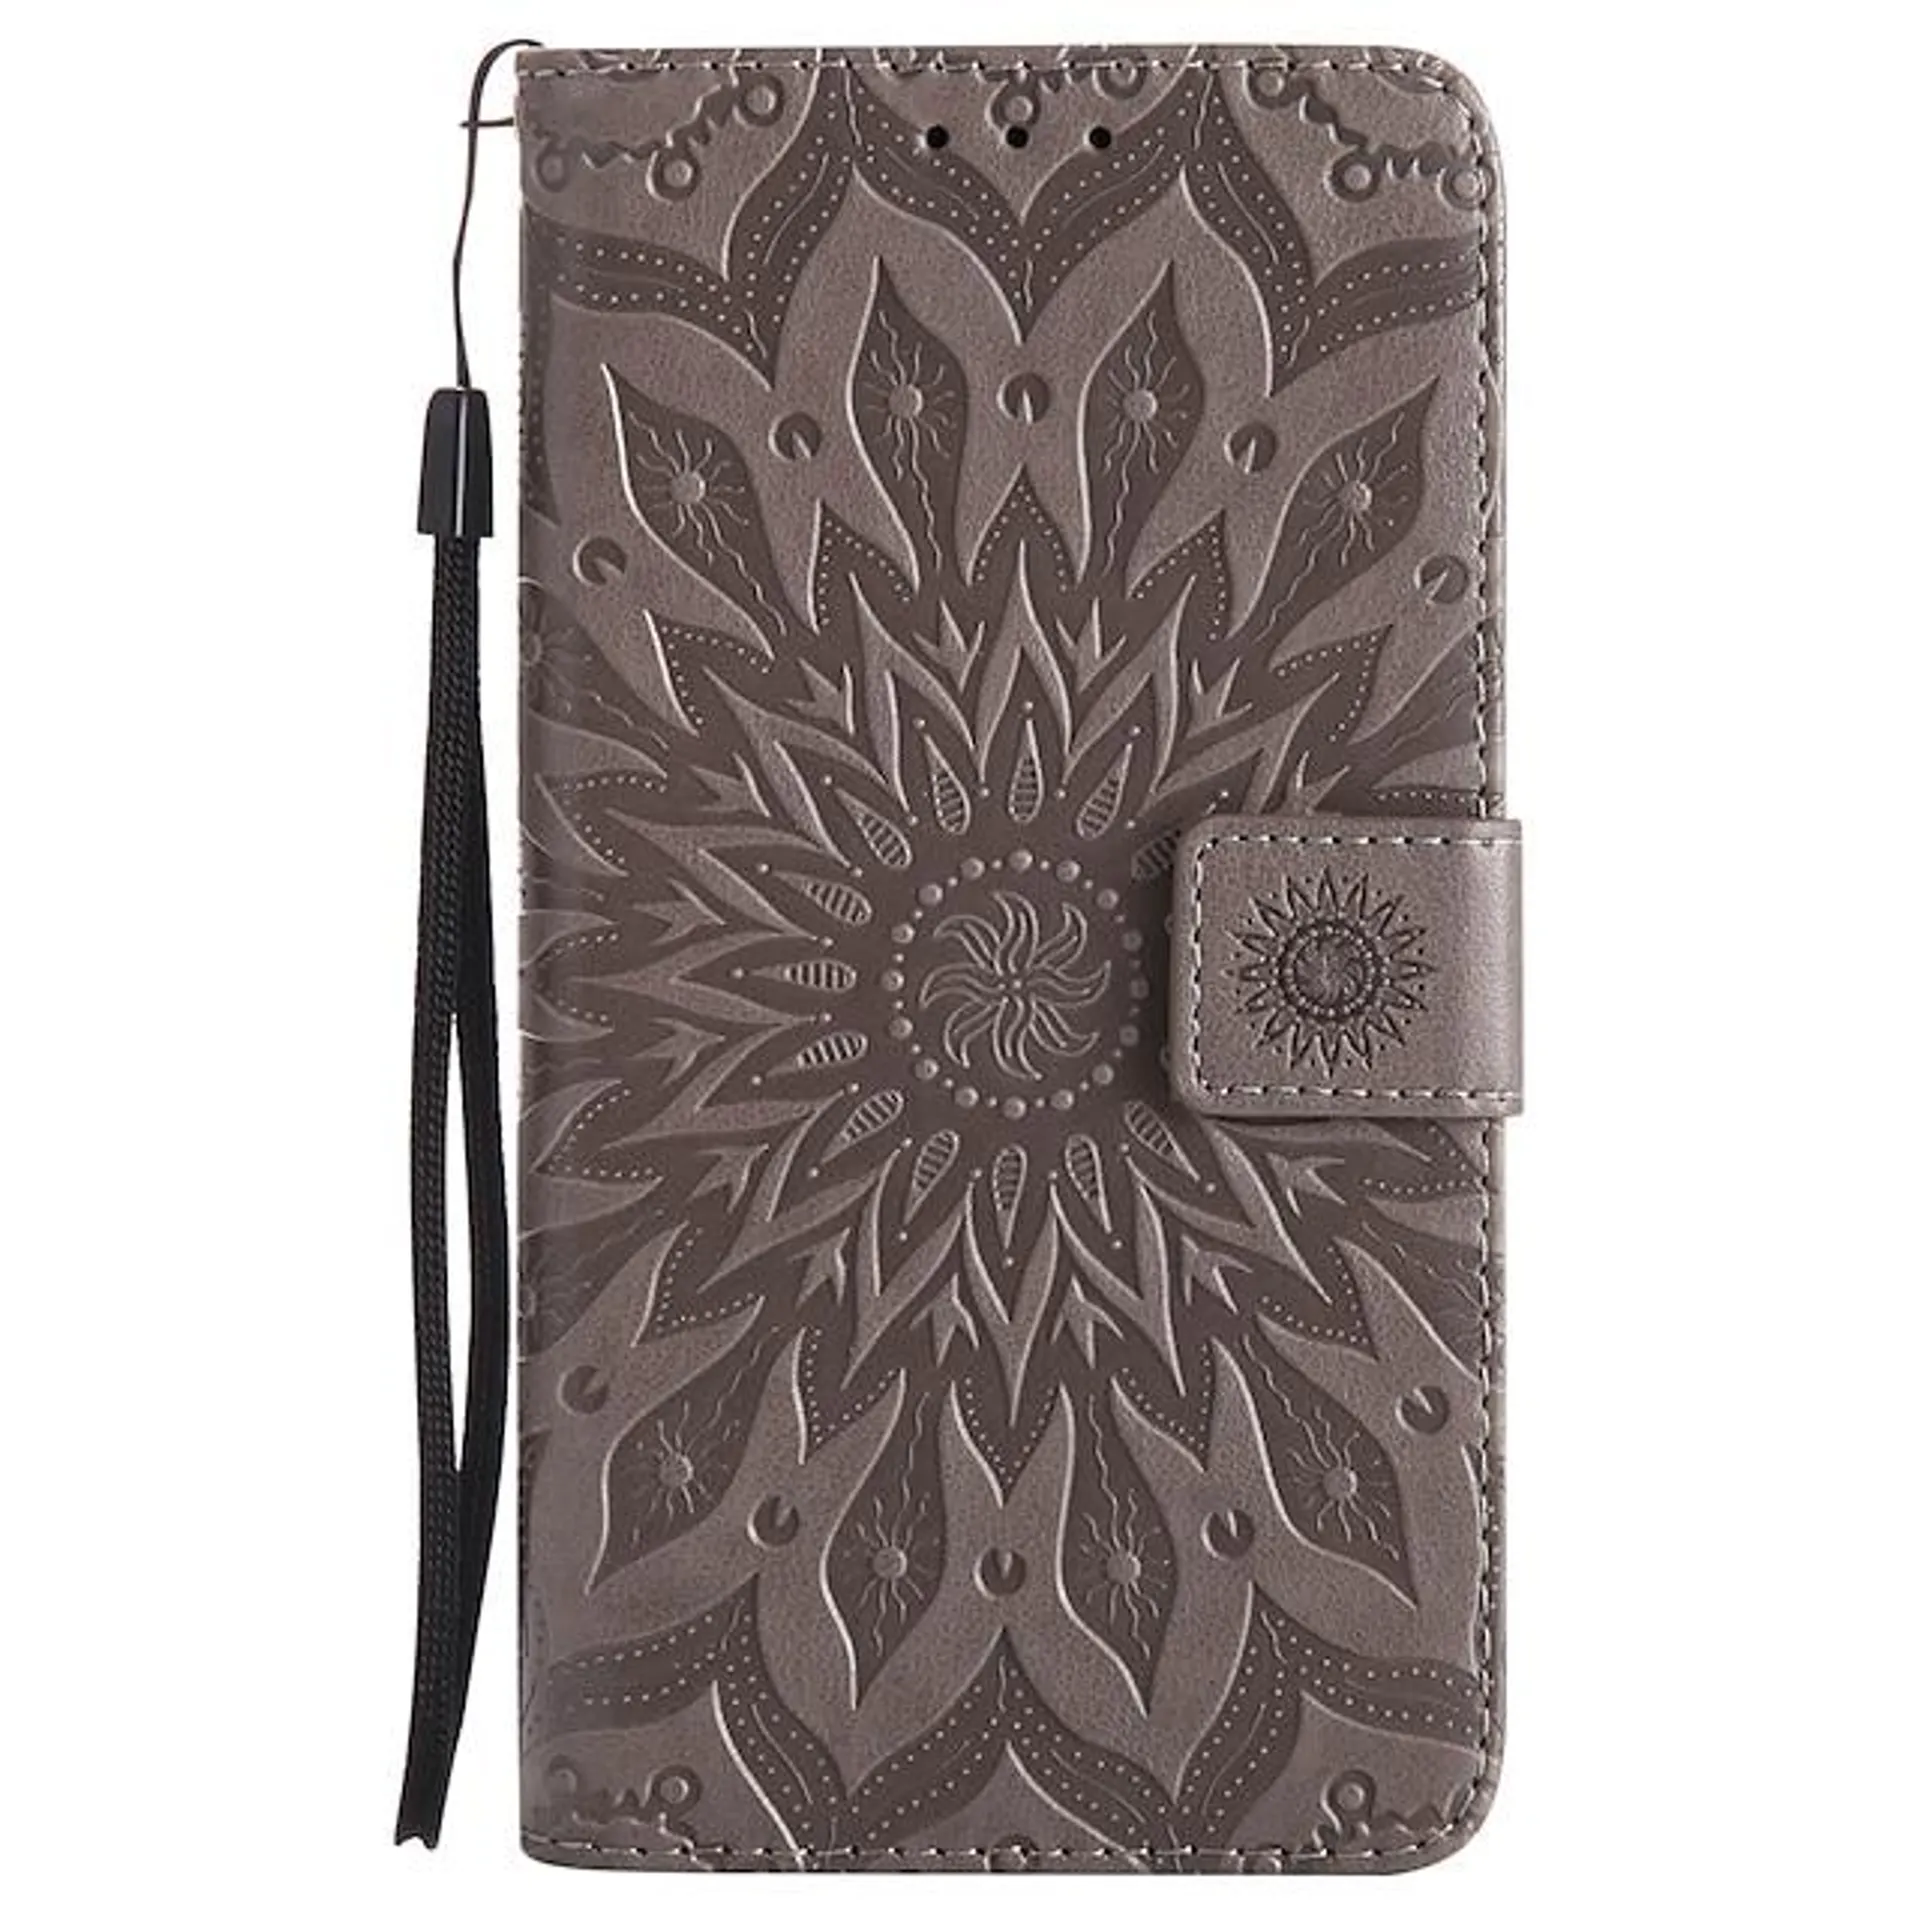 Phone Case For Samsung Galaxy Full Body Case J7 Prime J7 Perx J7 J7 (2016) J5 Prime J5 J5 (2016) J3 J3 (2016) J1 (2016) Wallet Card Holder with Stand Mandala Hard PU Leather